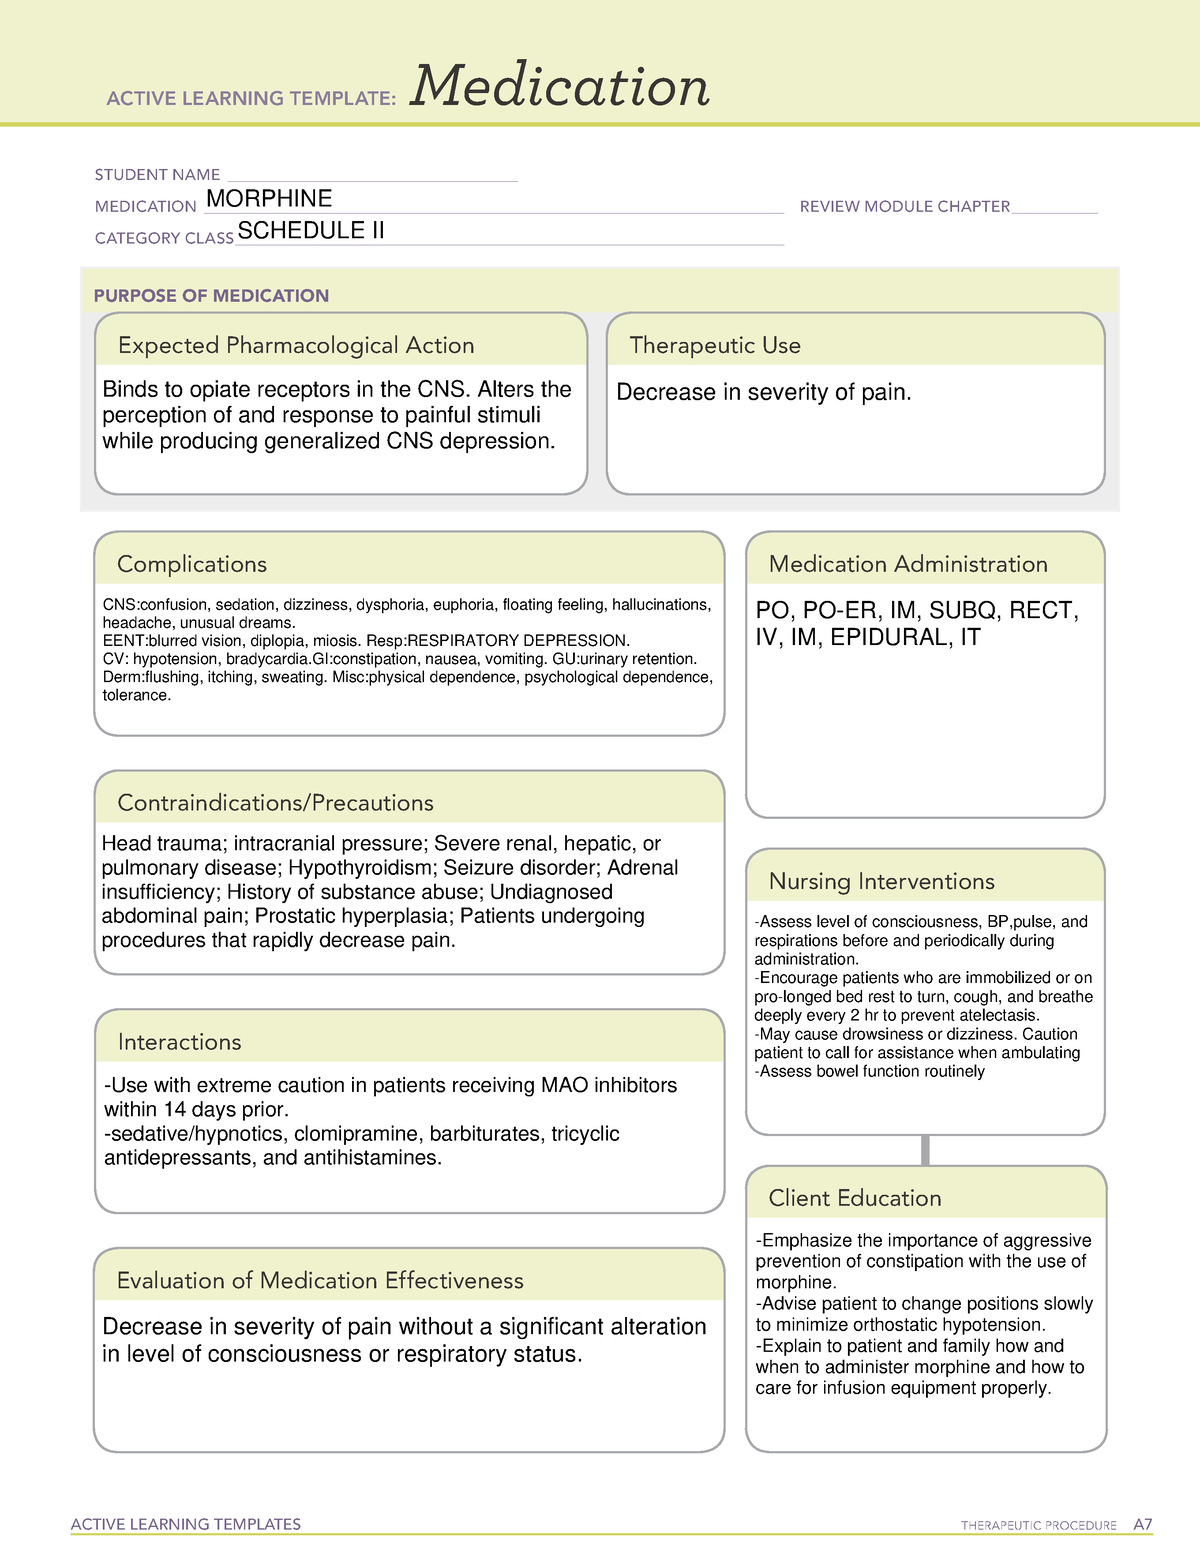 Morphine ATI Template - ####### ACTIVE LEARNING TEMPLATES THERAPEUTIC ...